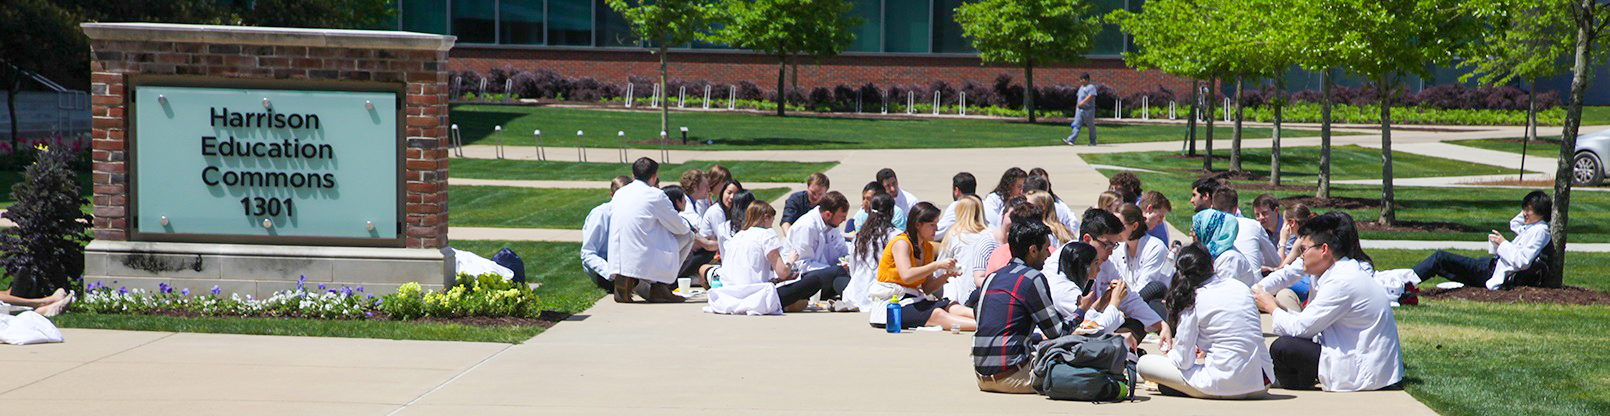 MCG students sitting eating outside Harrison Commons